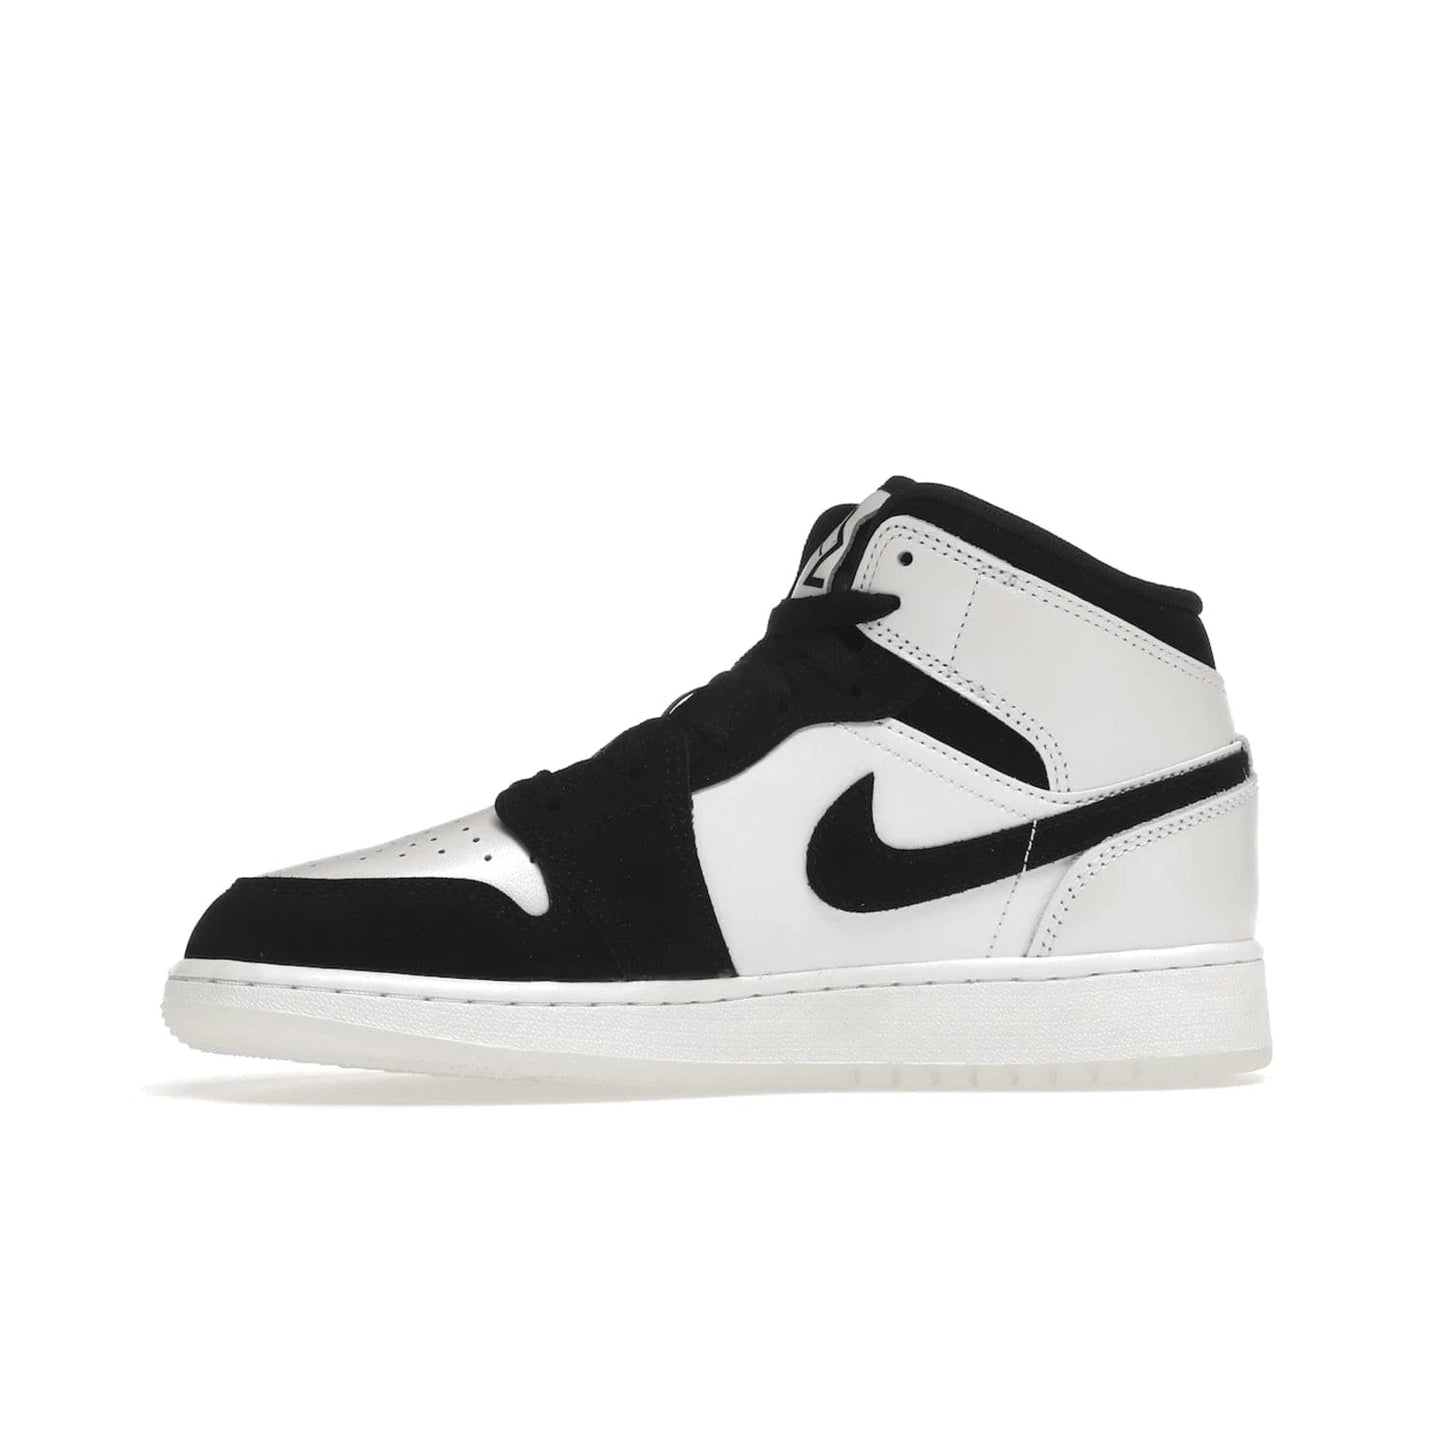 Jordan 1 Mid Diamond Shorts (GS) - Image 18 - Only at www.BallersClubKickz.com - Get the Jordan 1 Mid Diamond Shorts GS on 9th Feb 2022! Features a white, black & suede design with nylon tongue, stamped wings logo, rubber midsole & outsole. Only $100!